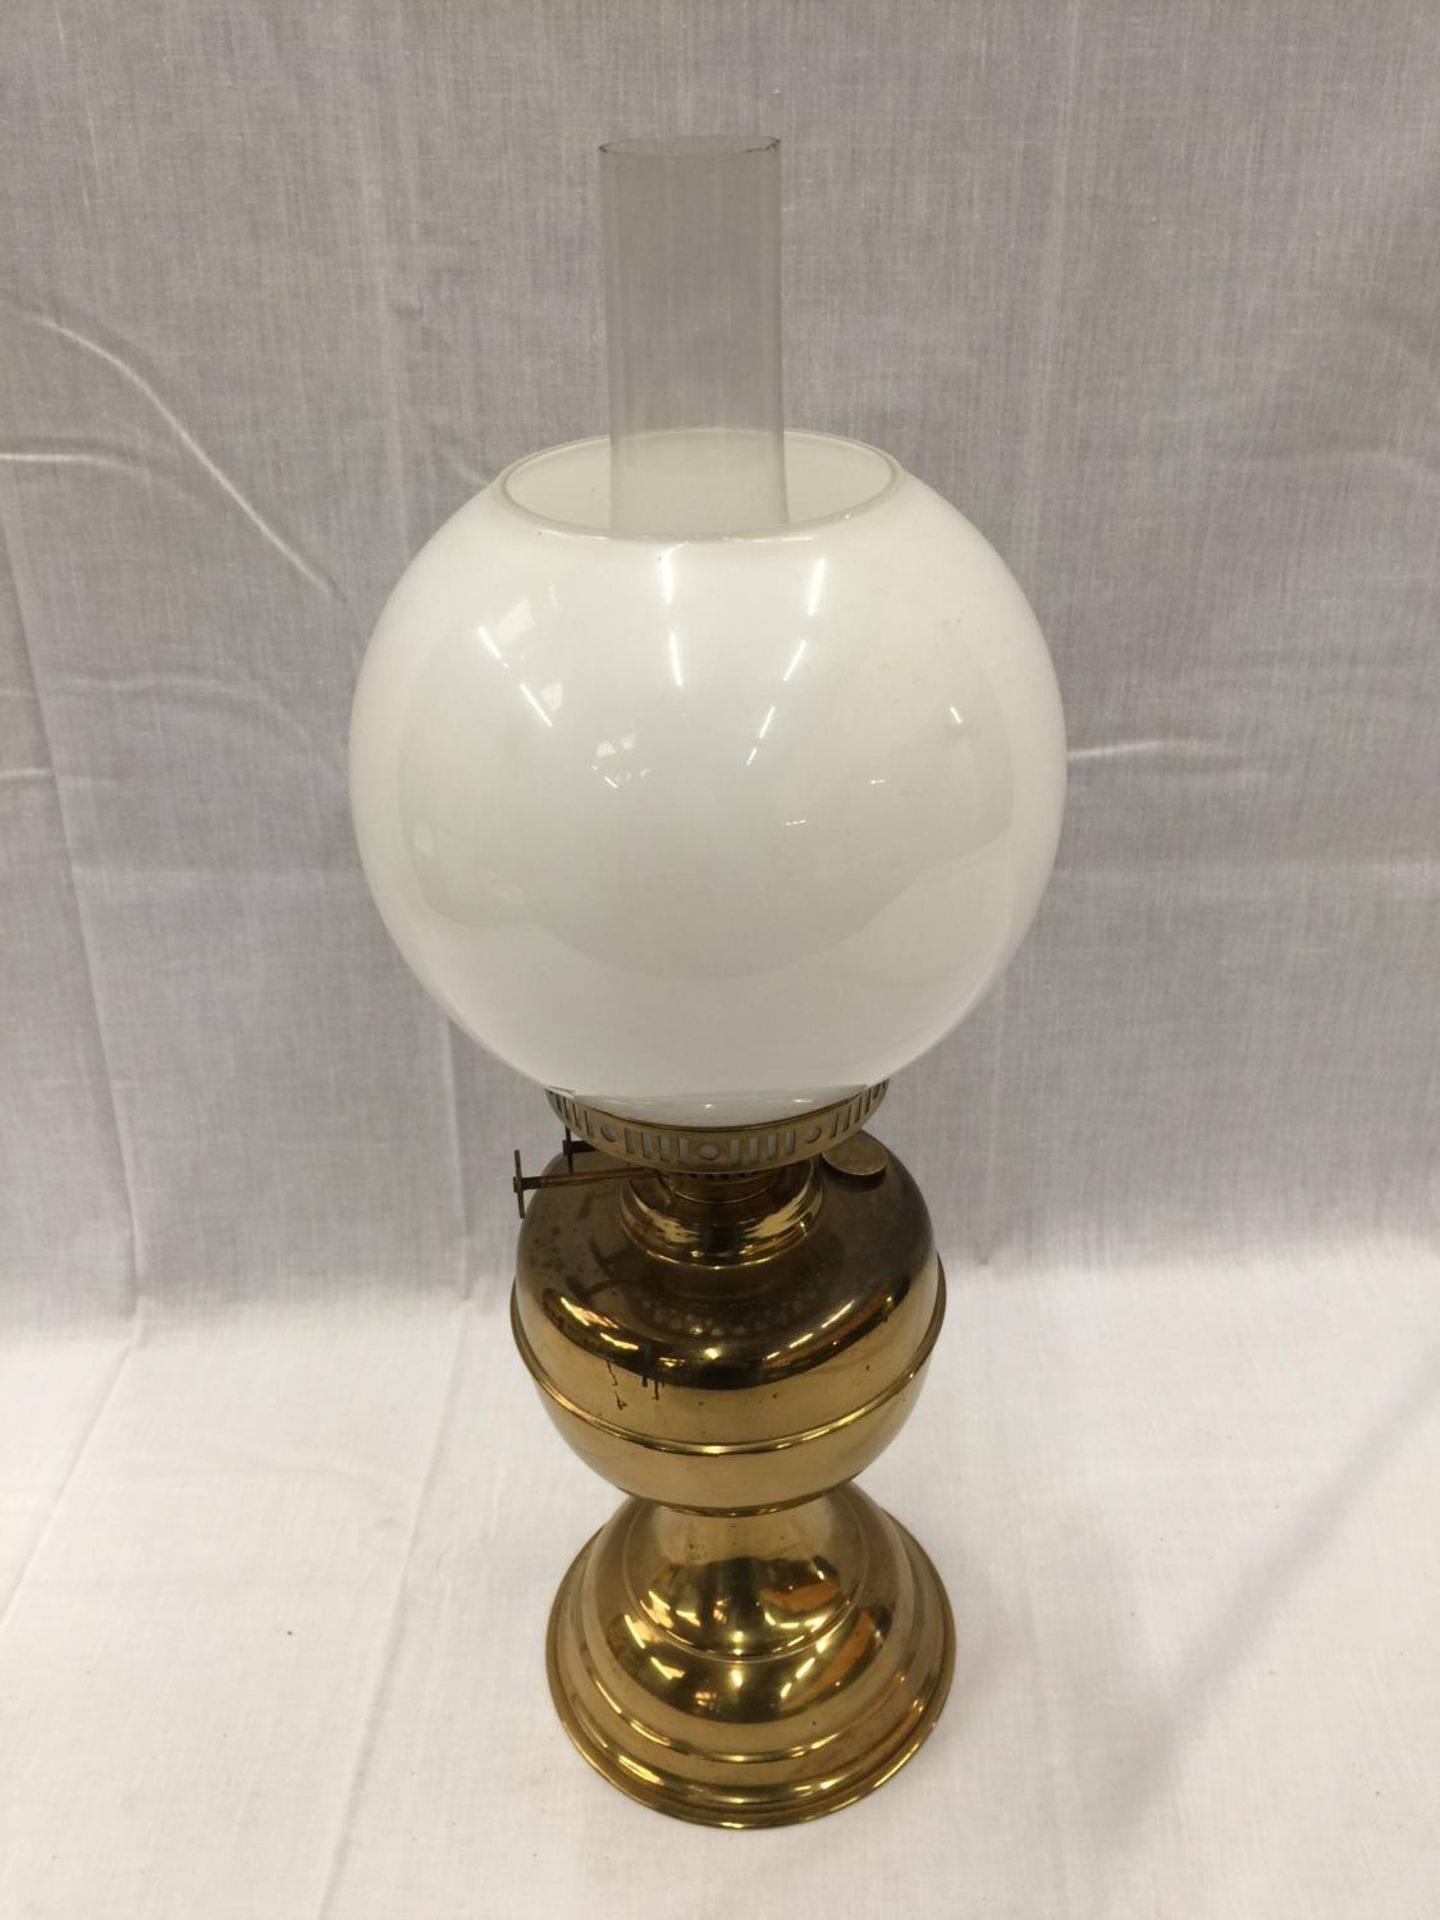 A HEAVY BRASS OIL LAMP WITH GLASS CHIMNEY AND MILK GLASS SHADE, HEIGHT APPROX 50CM